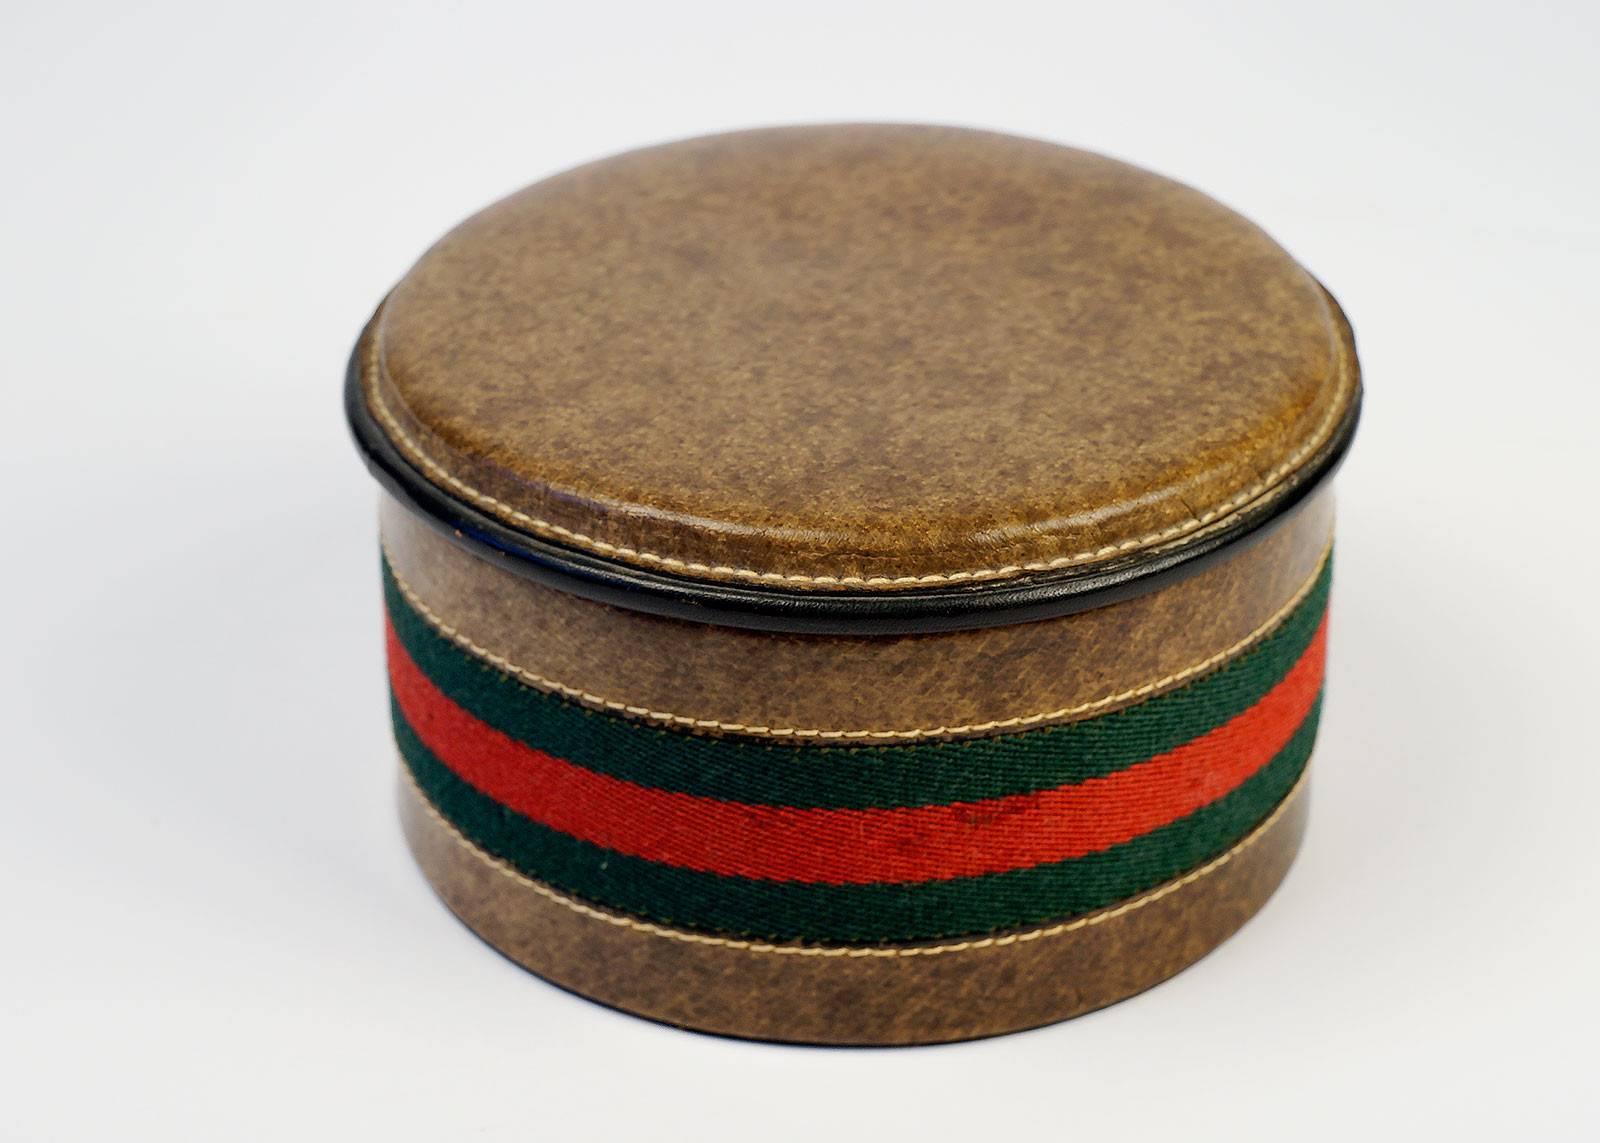 Vintage 1970's Gucci leather Jewelry/Desk box with hallmark red and green woven ribbon pattern and red interior.

-Measurements-
Tall: 3"
Diameter: 5"
 
Good Vintage Condition:Please remember all clothes are previously owned and gently